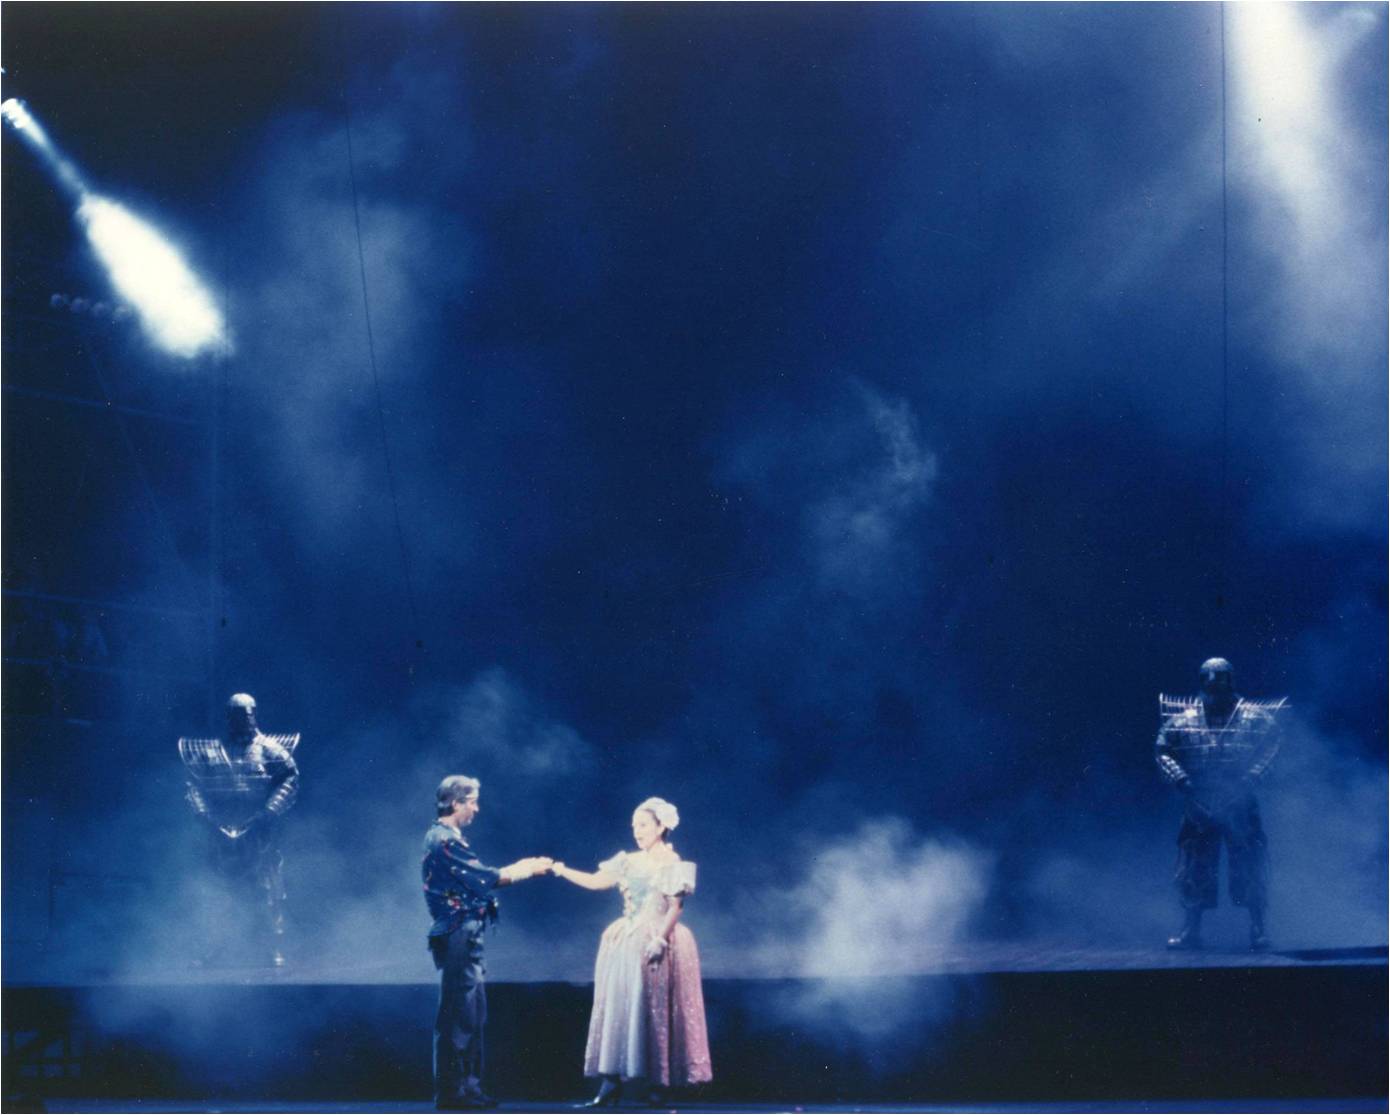 Mozart’s The Magic Flute at Blossom Music Center, 1985